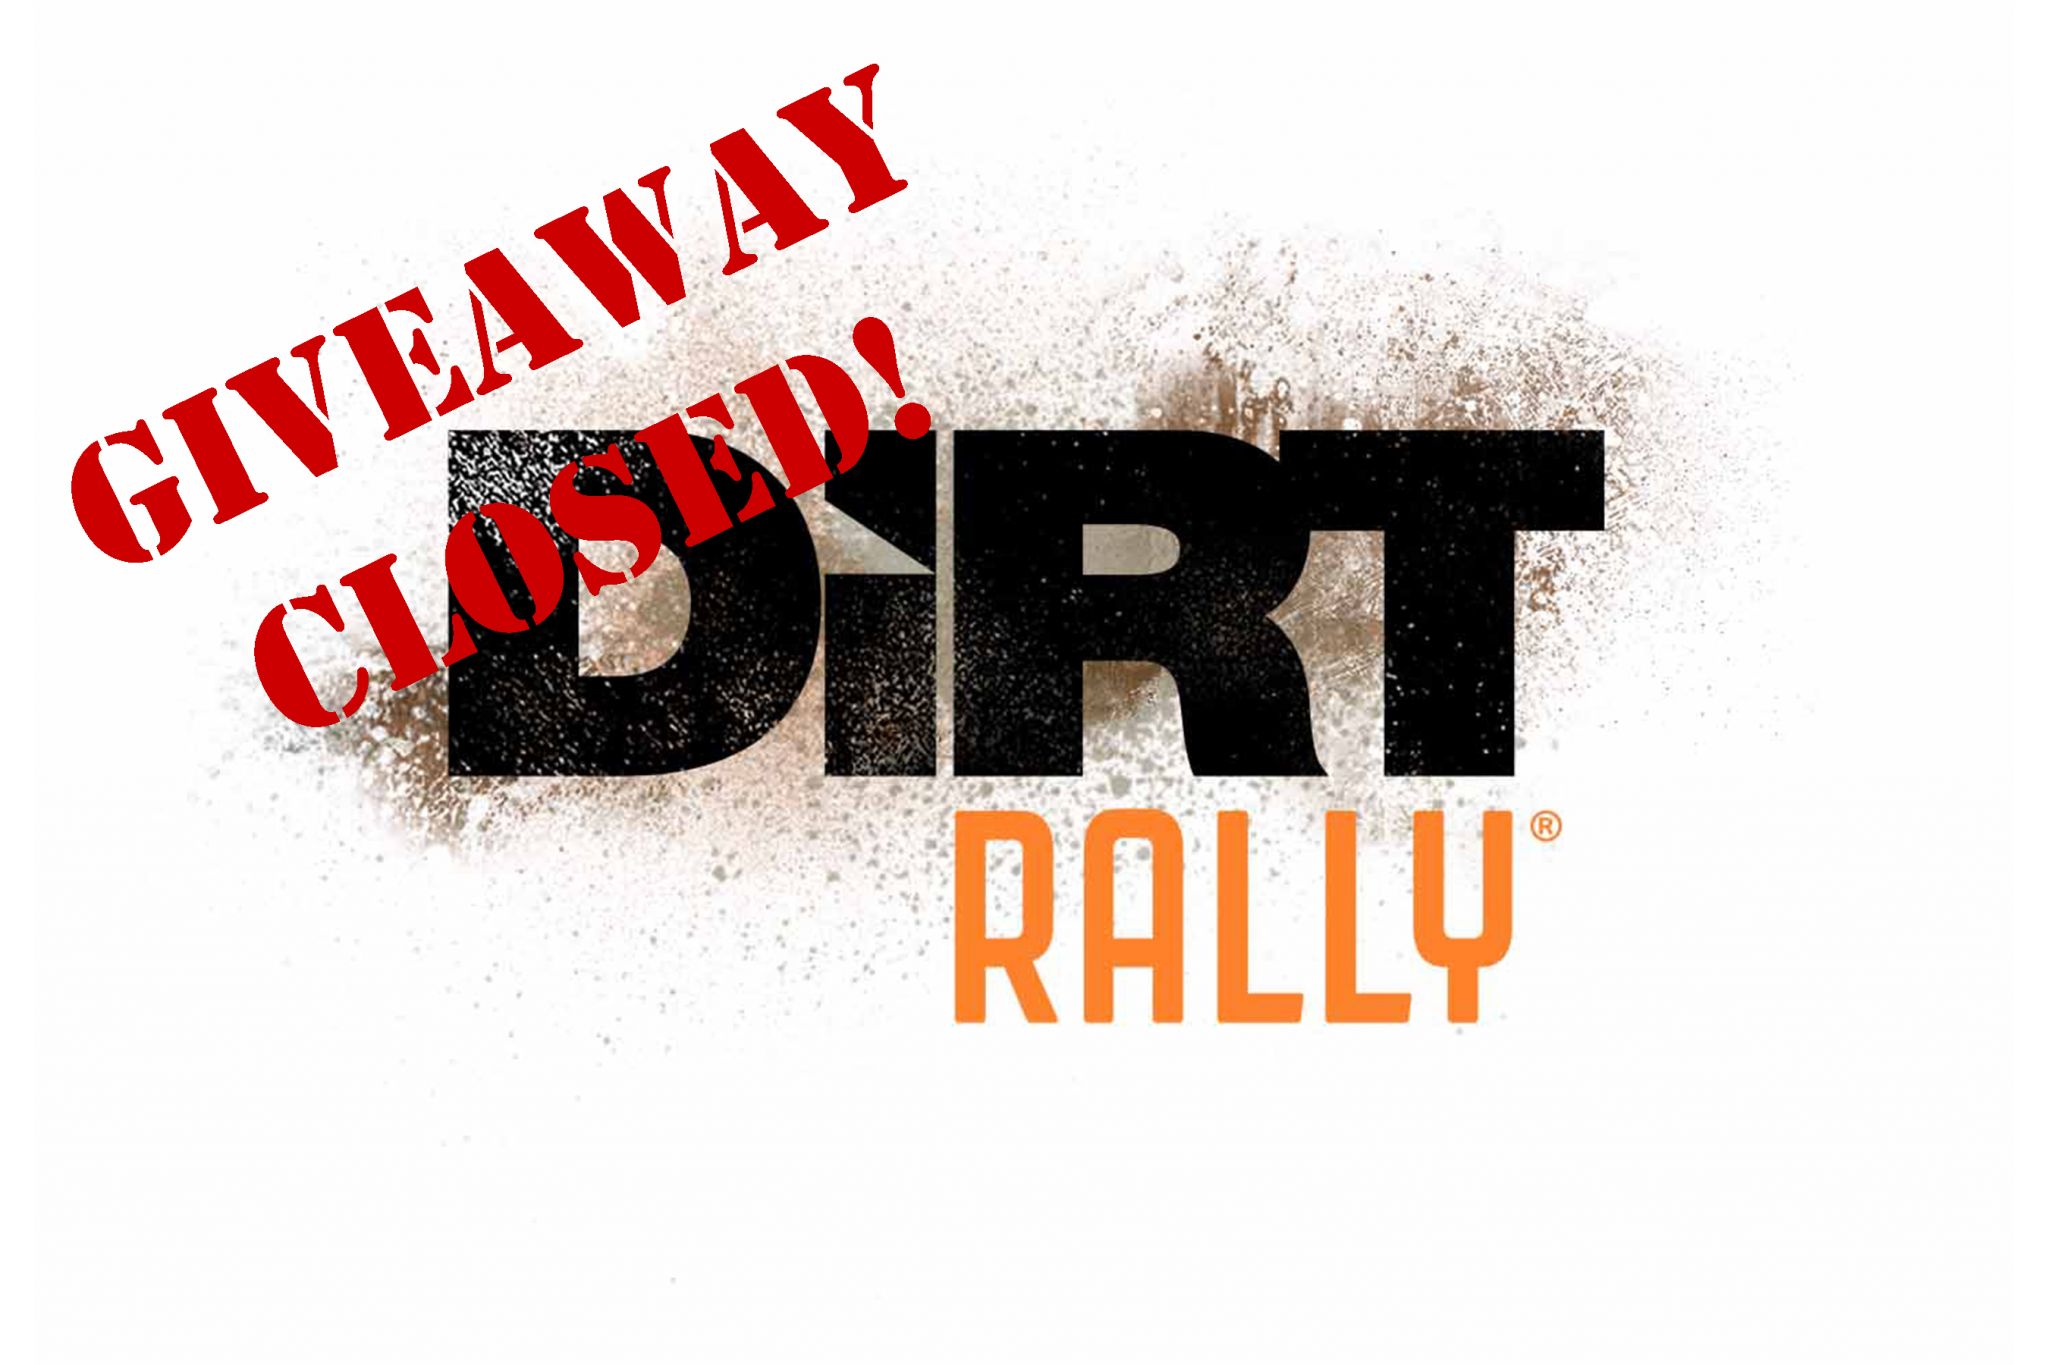 The DiRT Rally Giveaway is Closed